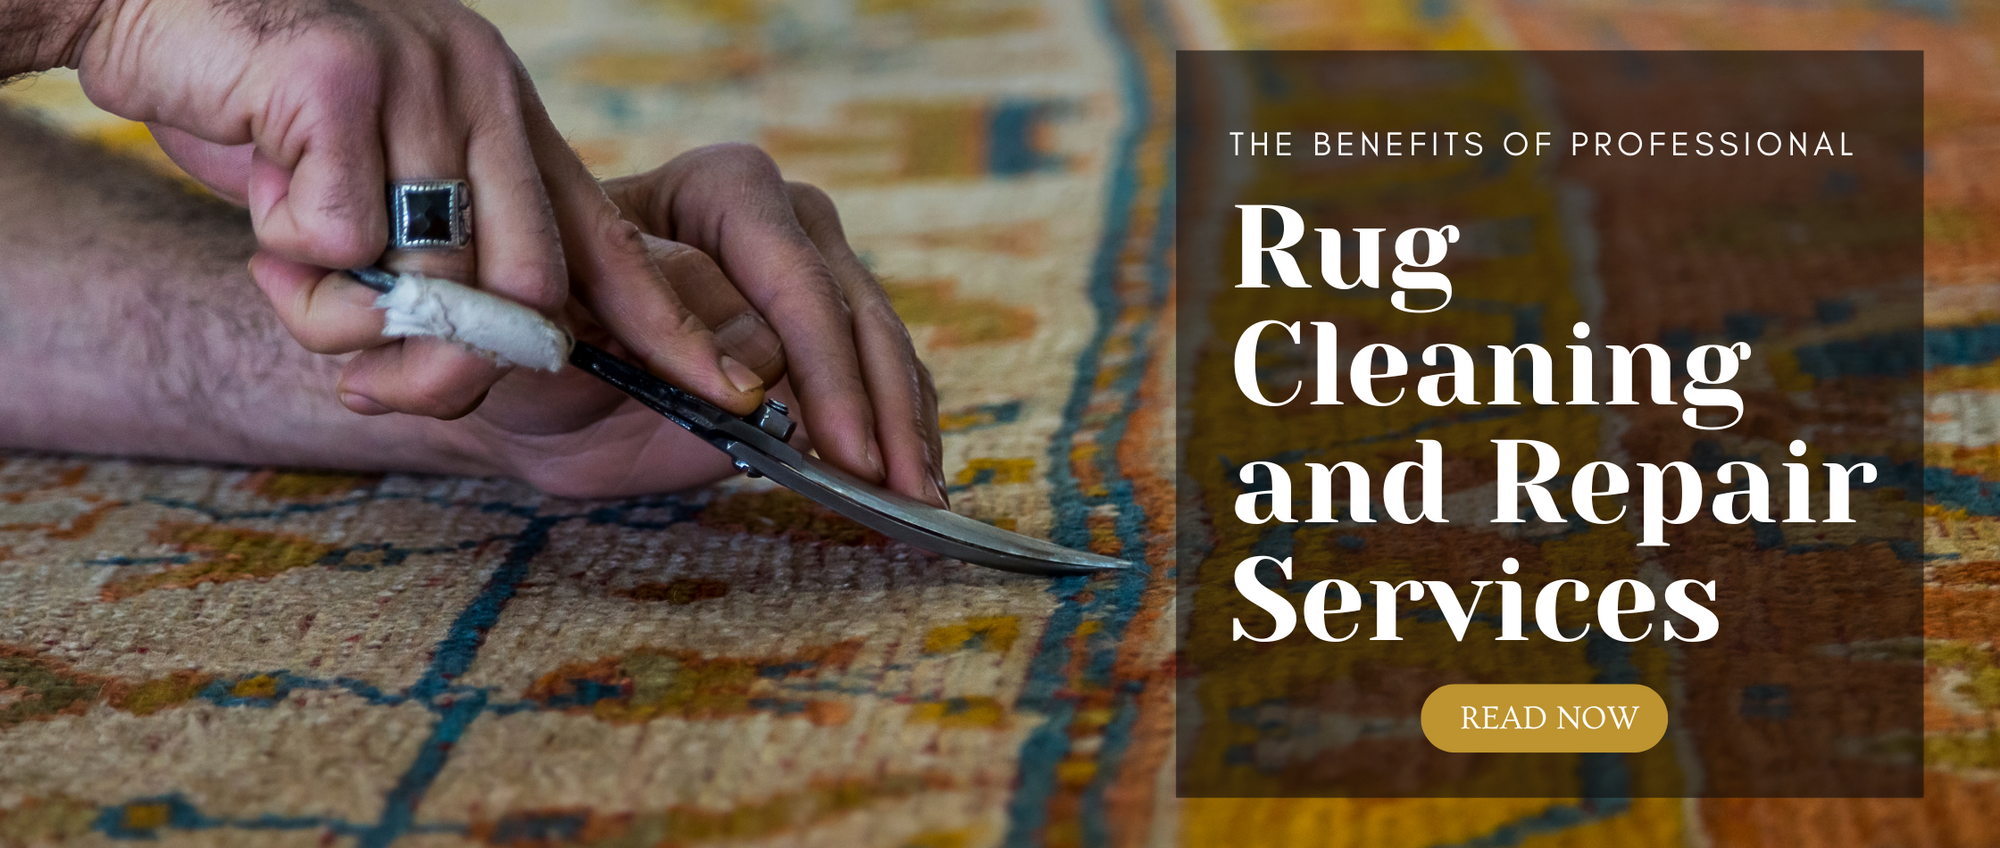 The Benefits of Professional Rug Cleaning and Repair Services